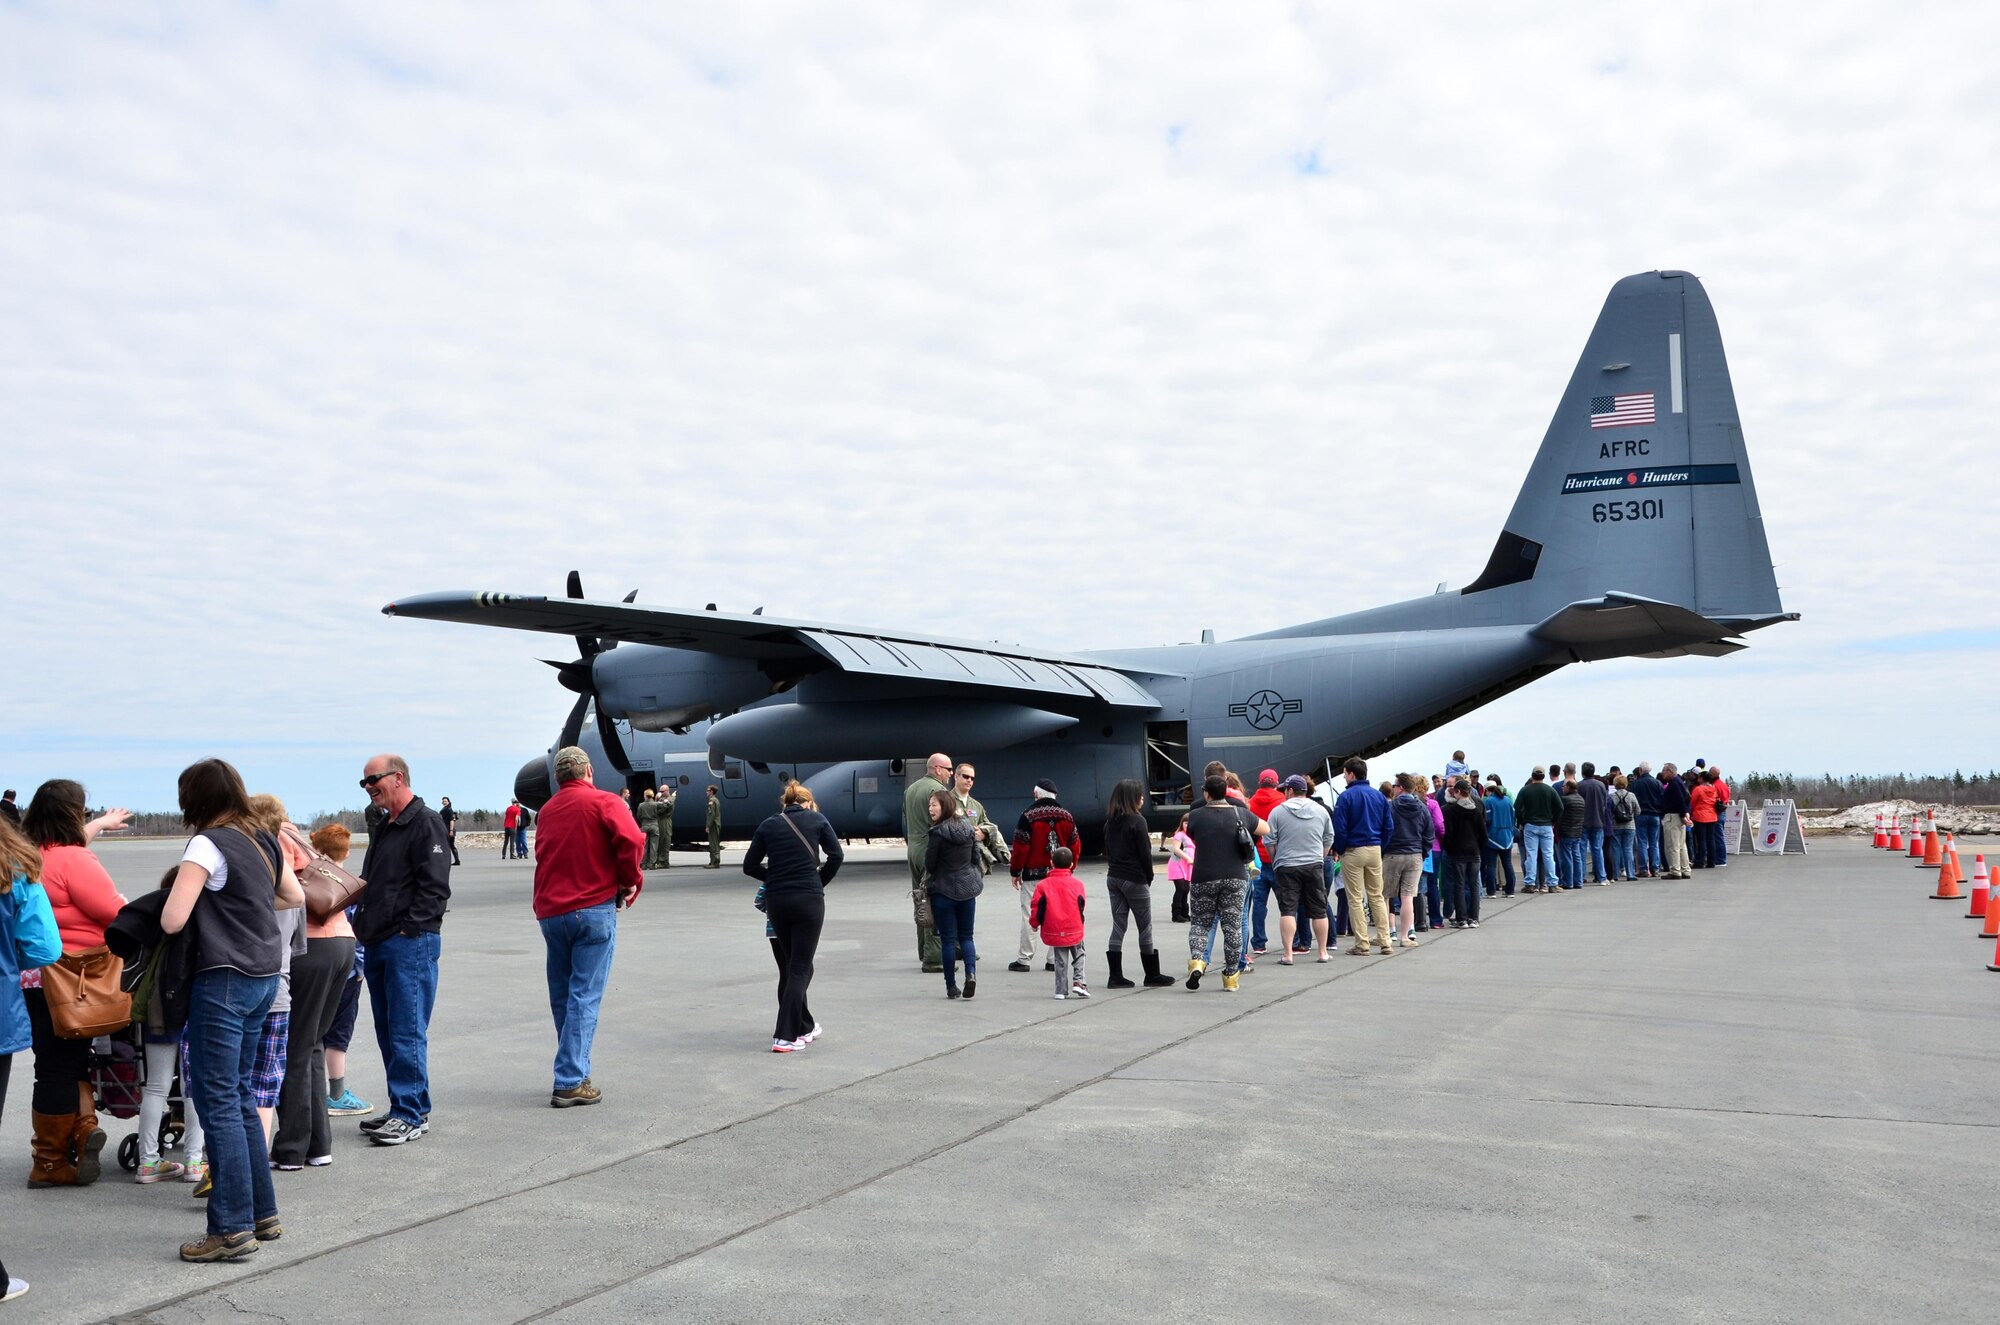 More than 700 visitors waited in line to meet the 53rd Weather Reconnaissance Squadron Hurricane Hunter crew members during the Halifax portion of the 2015 Hurricane Awareness Tour at the Halifax-Stanfield International Airport in Nova Scotia May 3.